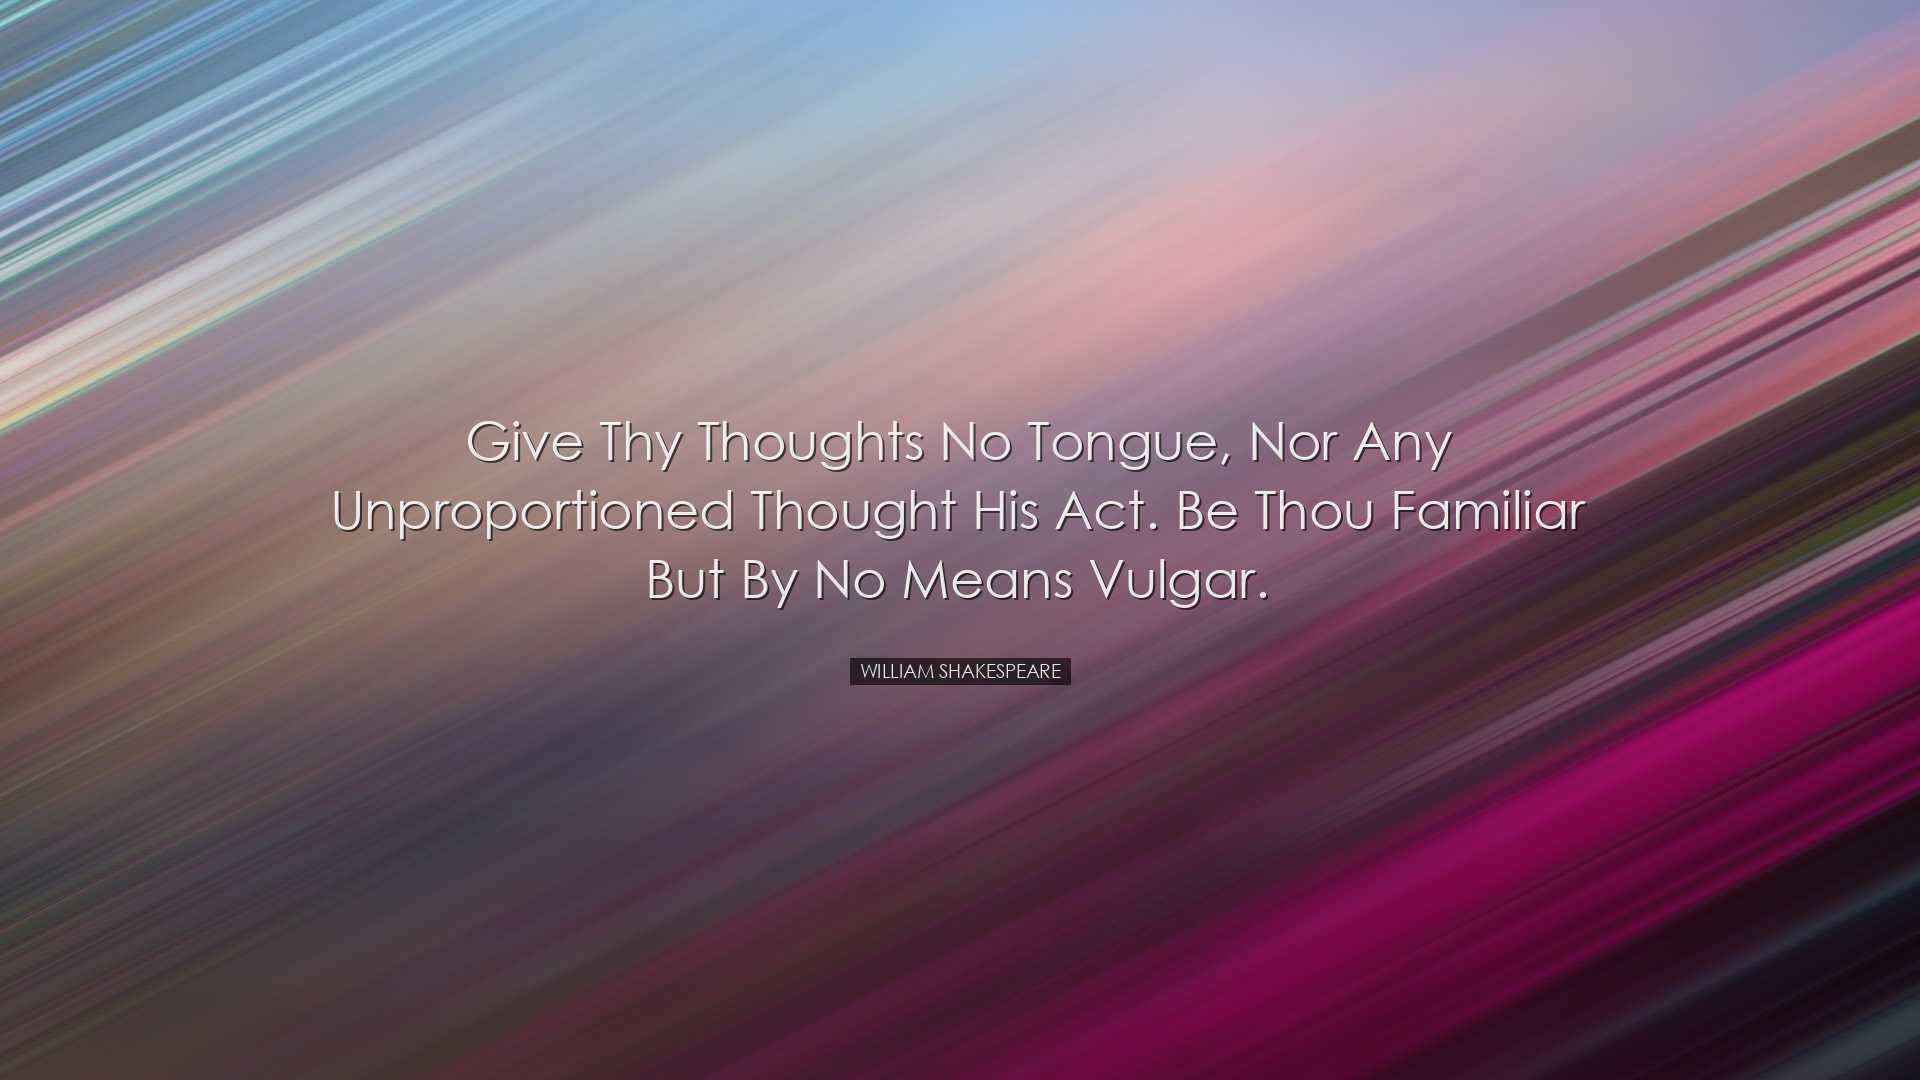 Give thy thoughts no tongue, nor any unproportioned thought his ac